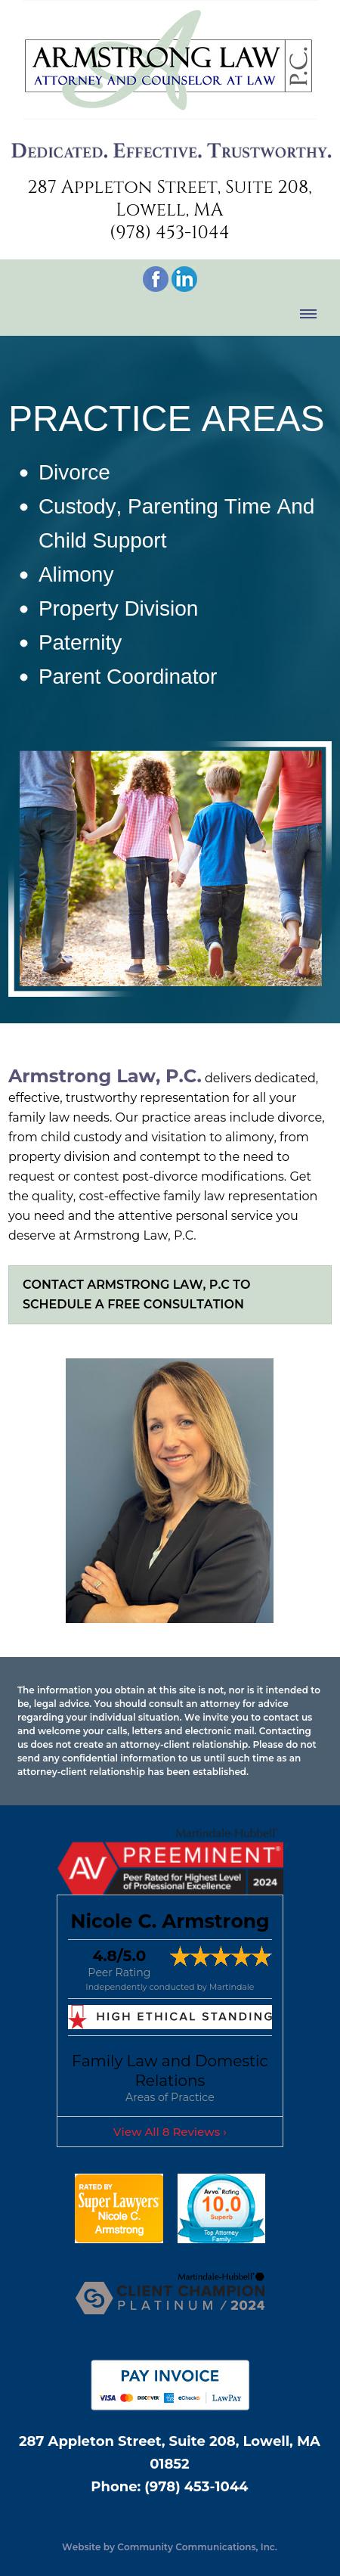 Armstrong Law, P.C. - Lowell MA Lawyers